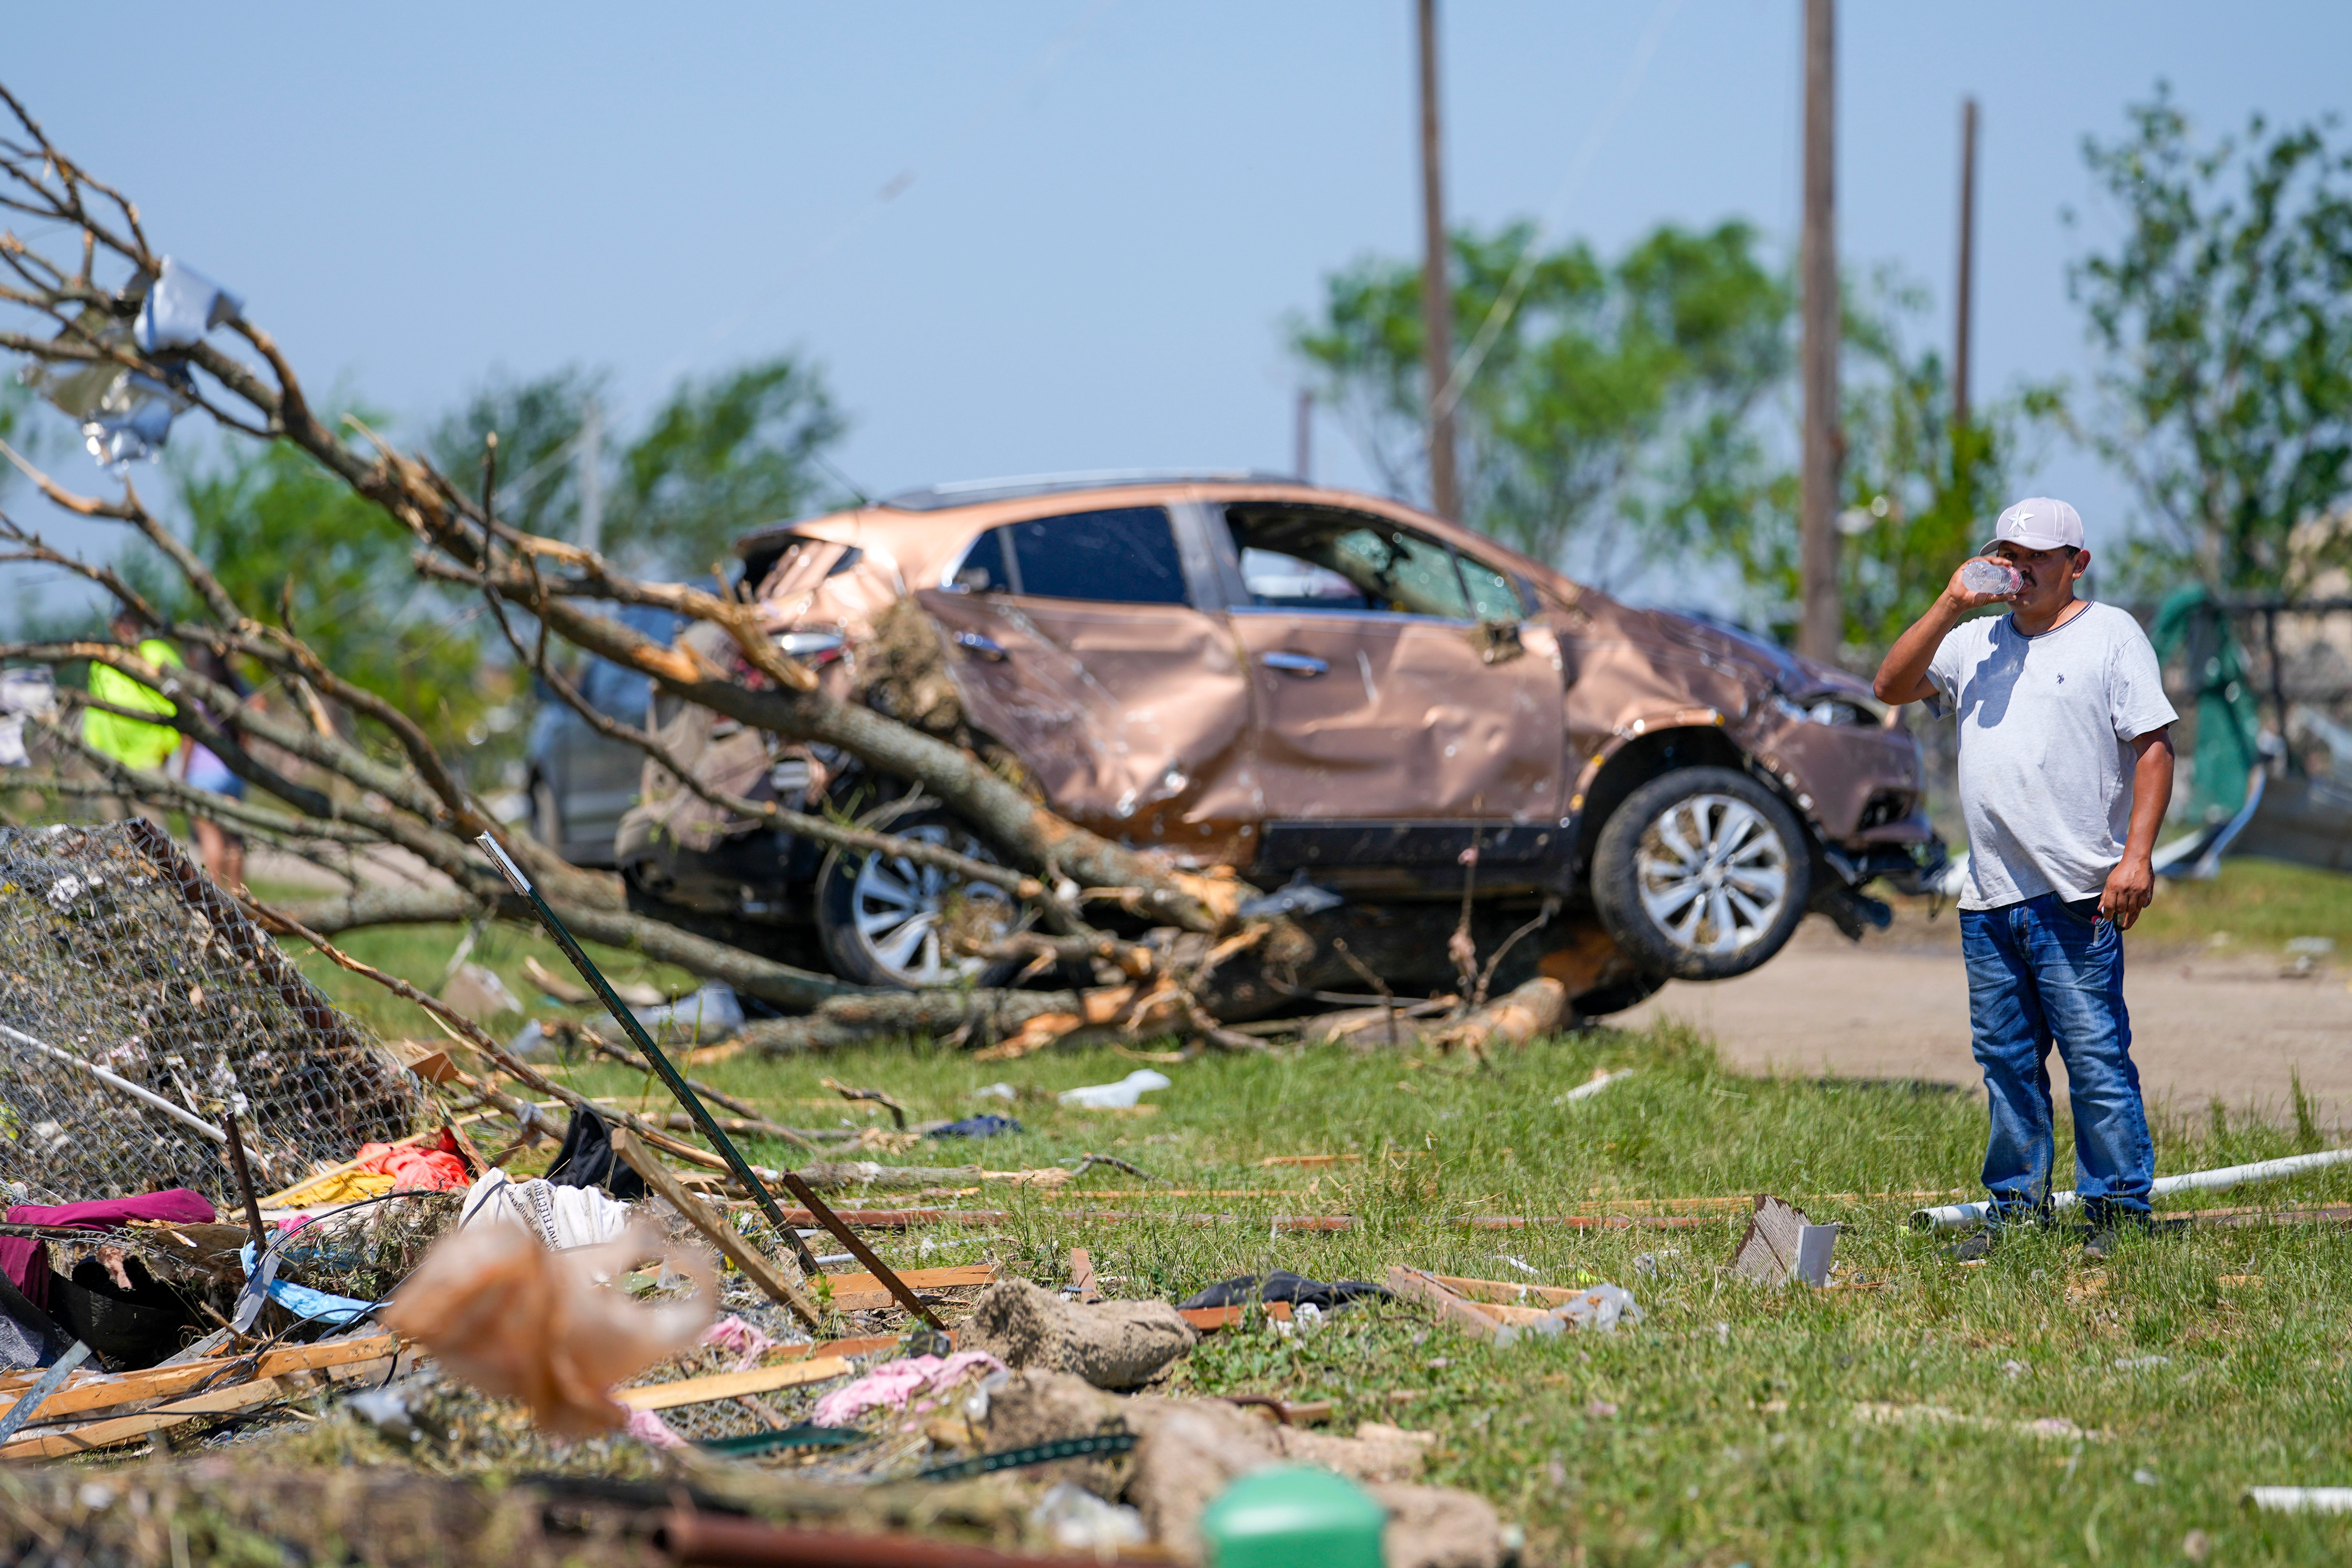 A man surveys damage to a neighbor's home after a deadly tornado ripped through Valley View, Texas